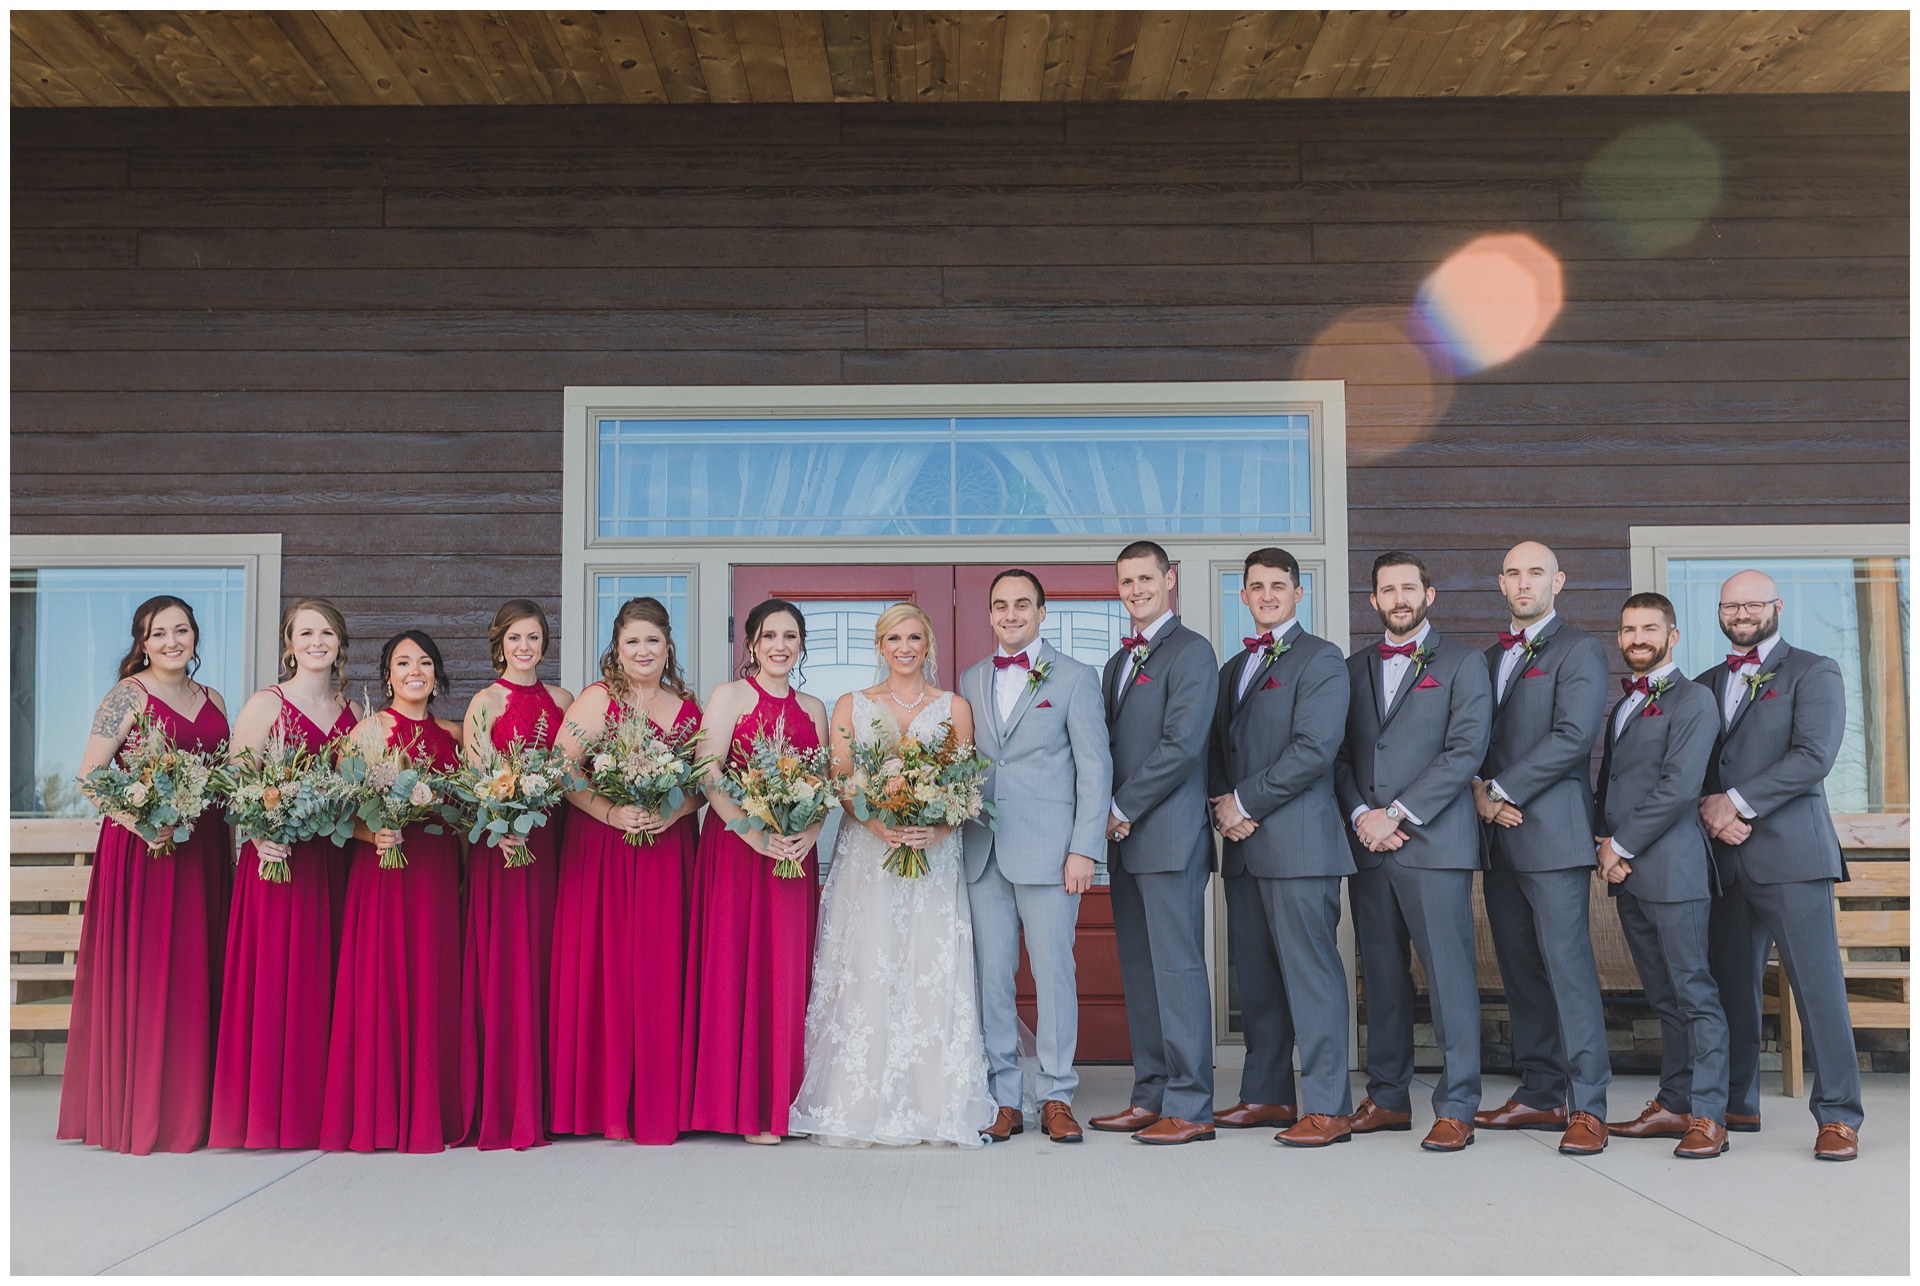 Wedding photography at Willows Bend in Carbondale, Kansas, by Kansas City wedding photographers Wisdom-Watson Weddings.